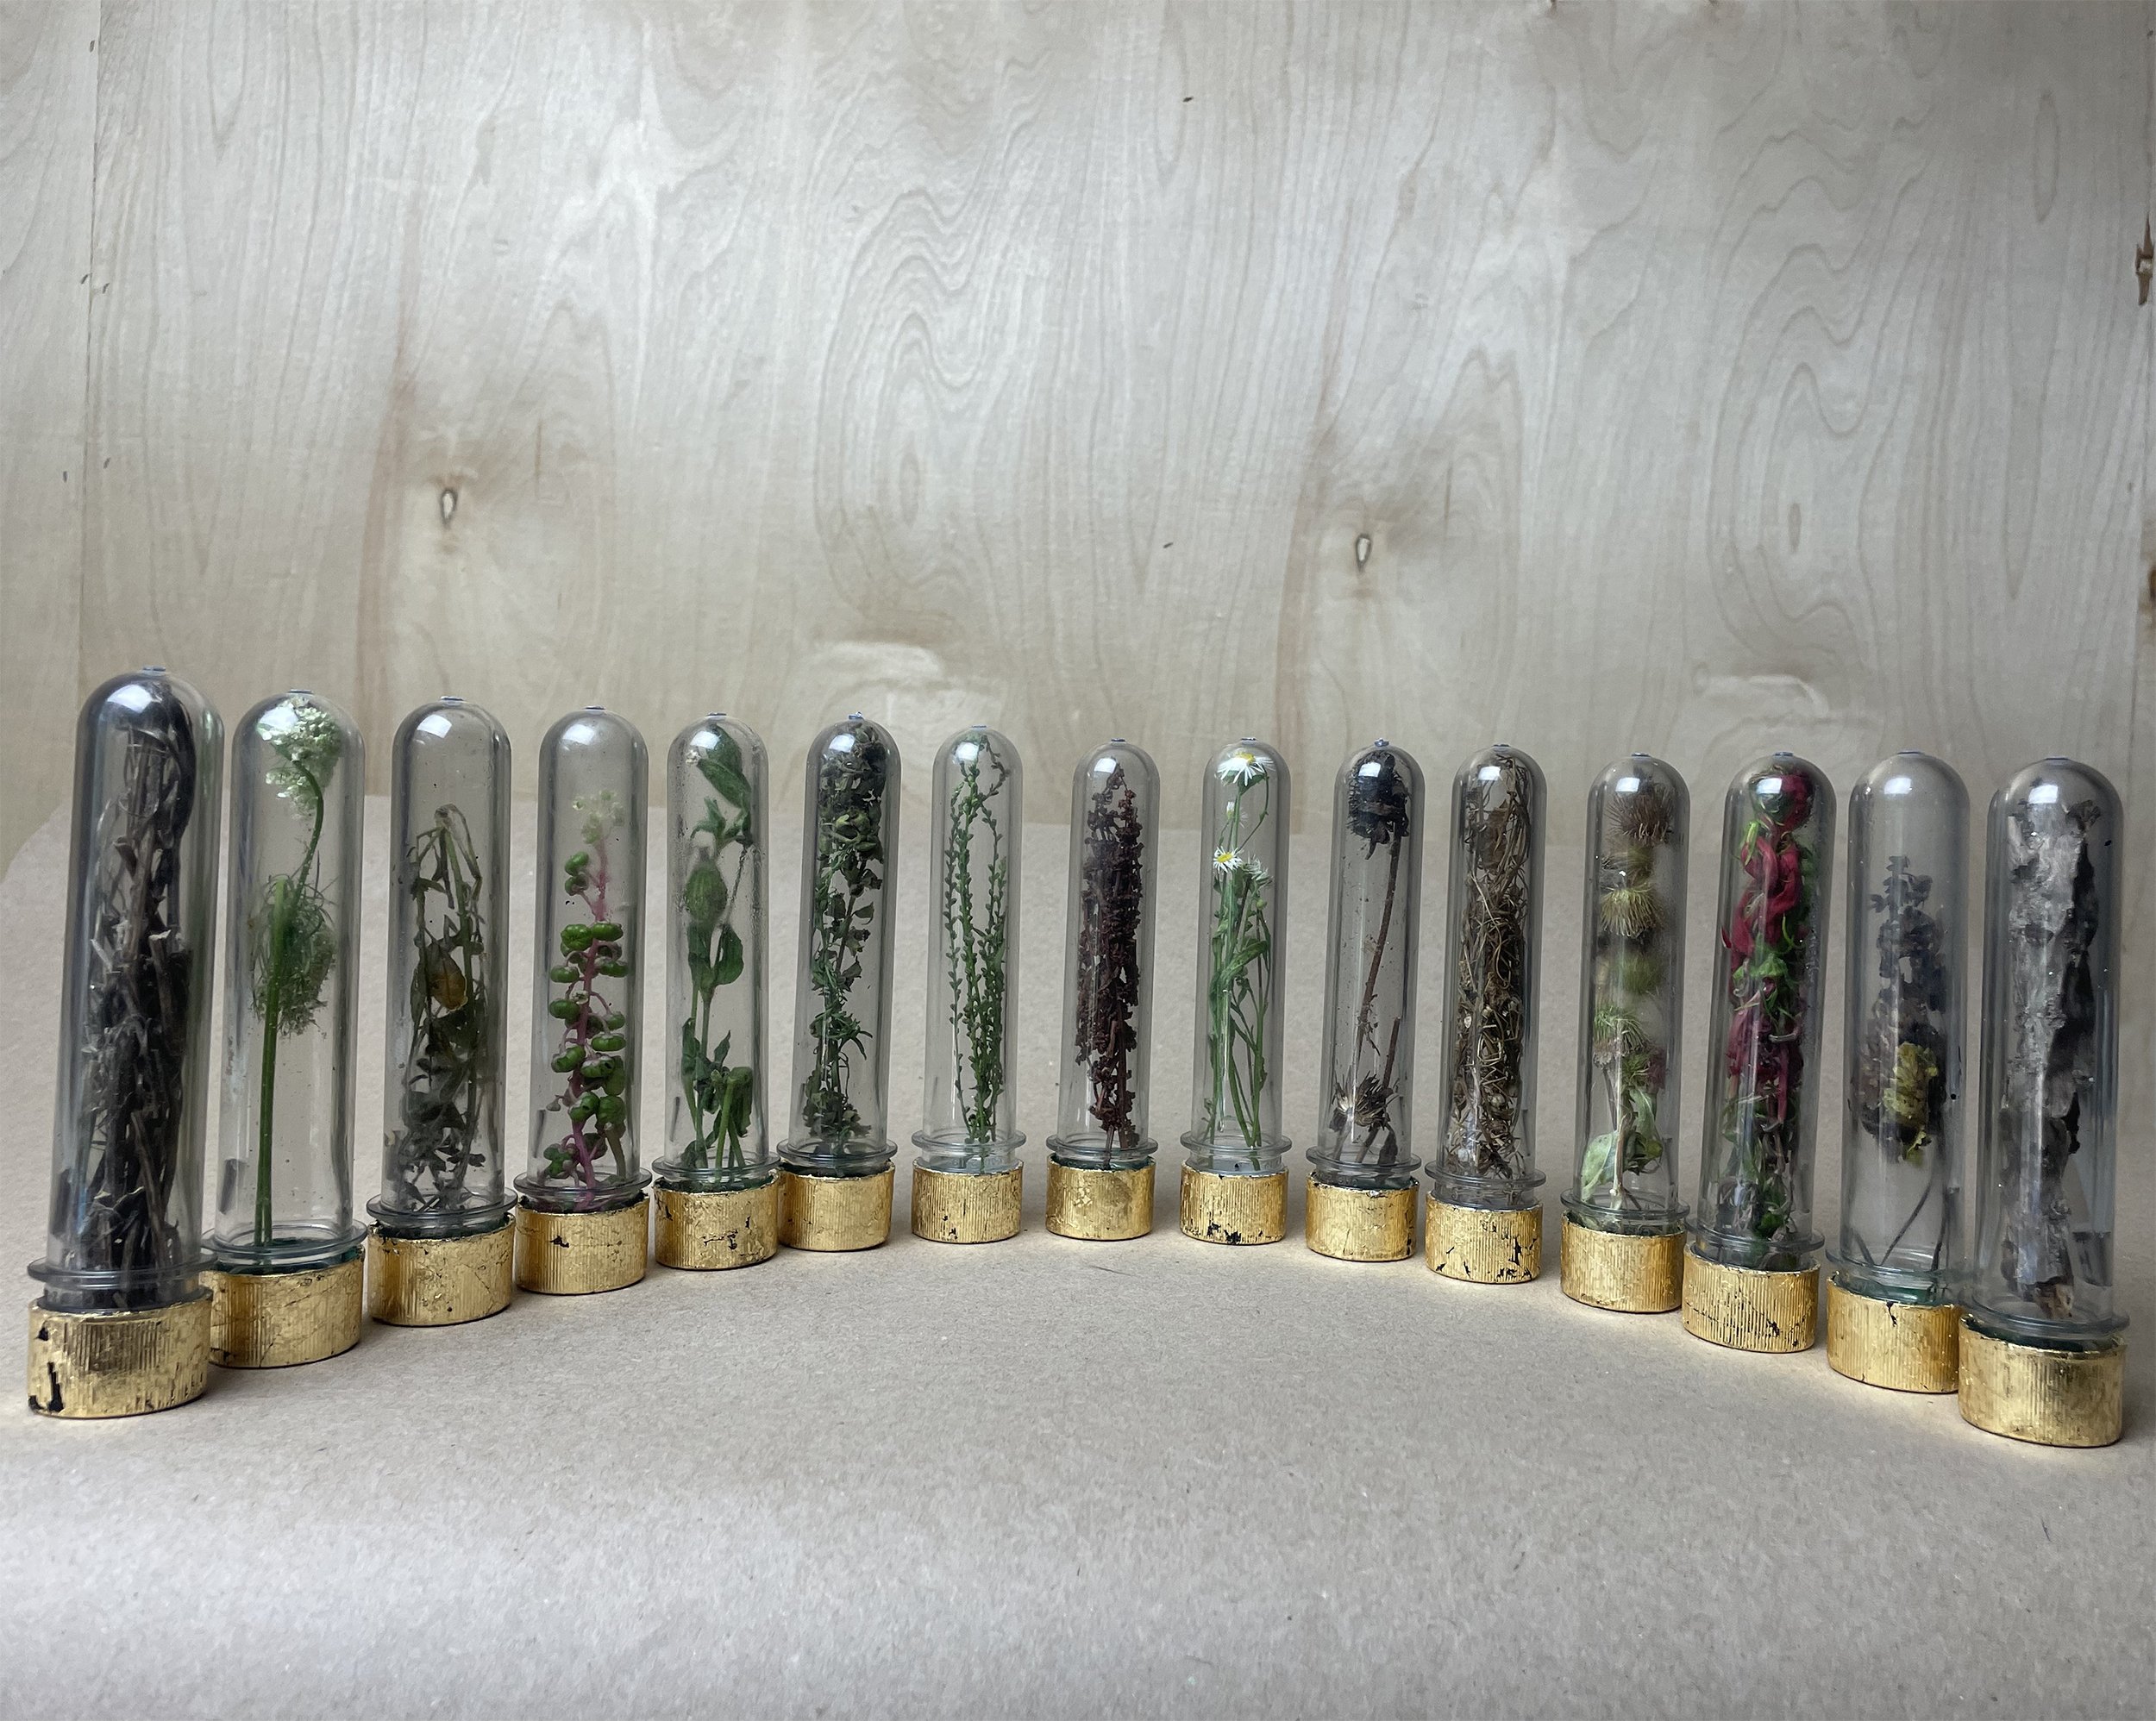   Passengers   Drifters Project at V4L Residency Harper’s Ferry, West Virginia  7” x 24” 15 weed local species in tubes 2023 